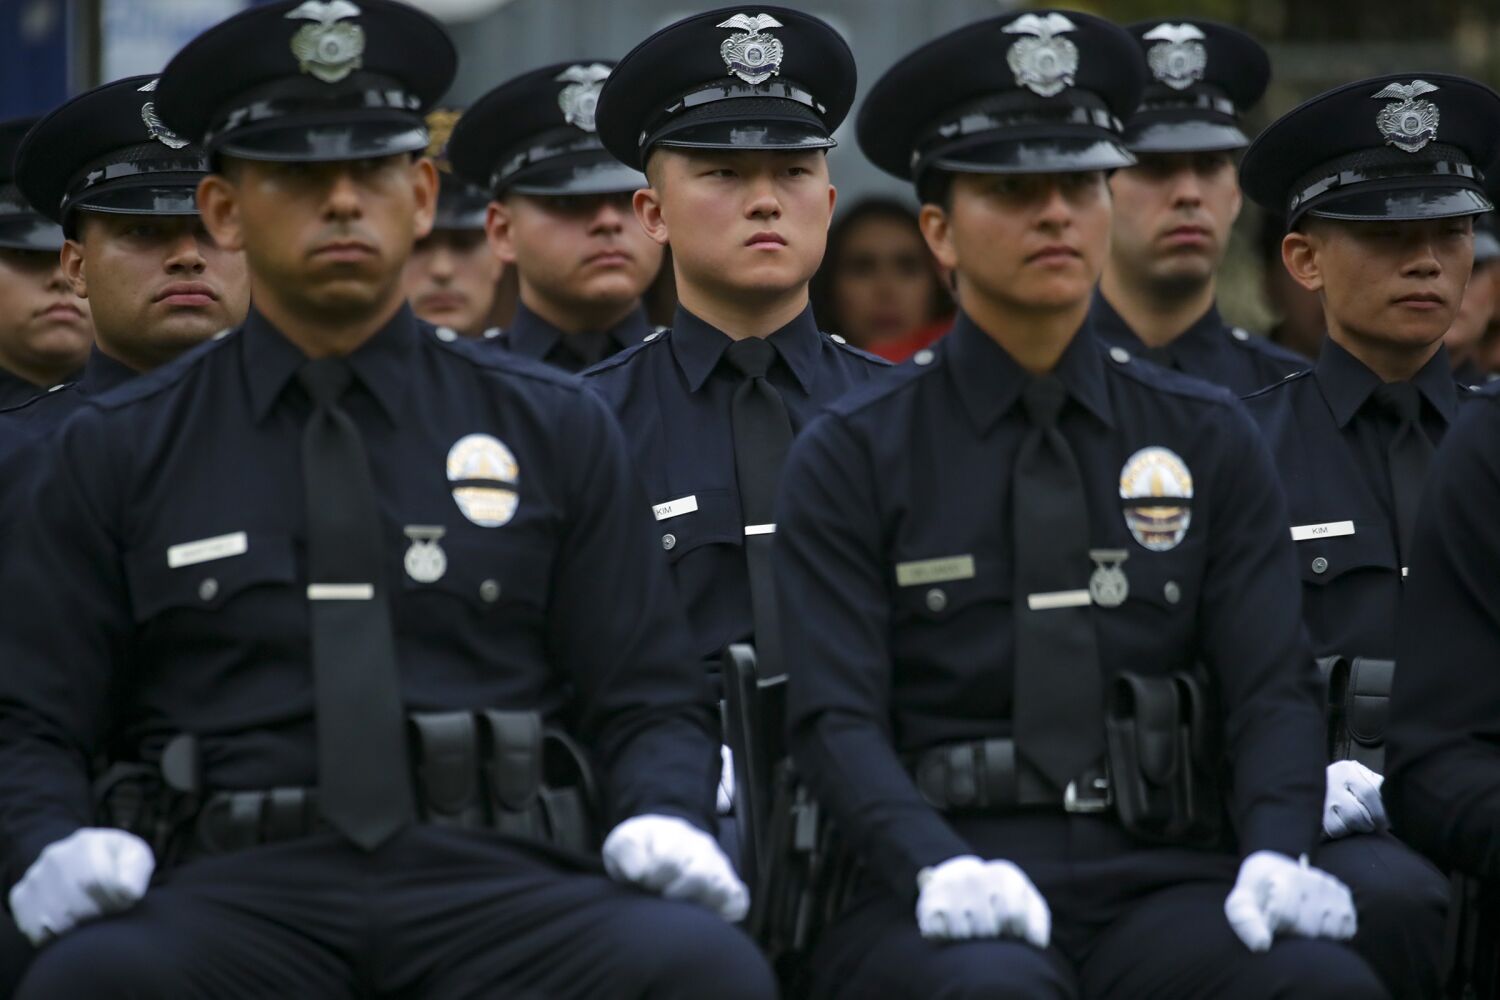 Younger Angelenos have far more negative view of police than elders, poll finds